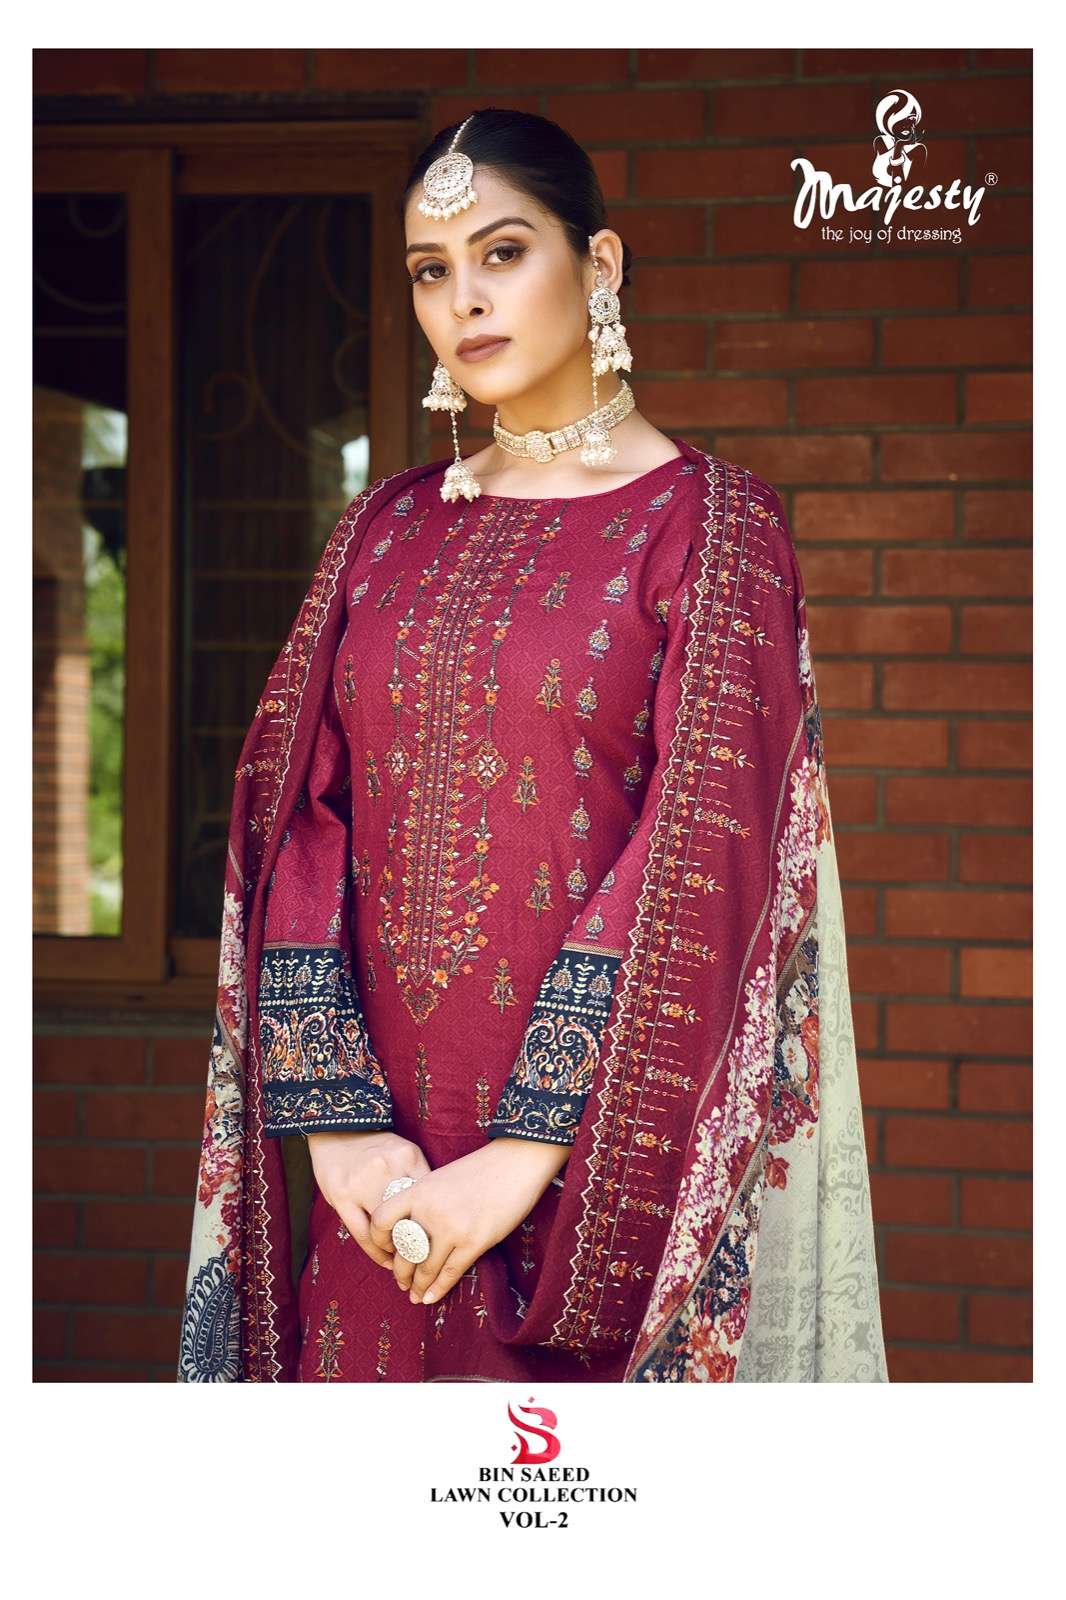 bin saeed lawn collection vol 2 by majesty printed pakistani suit